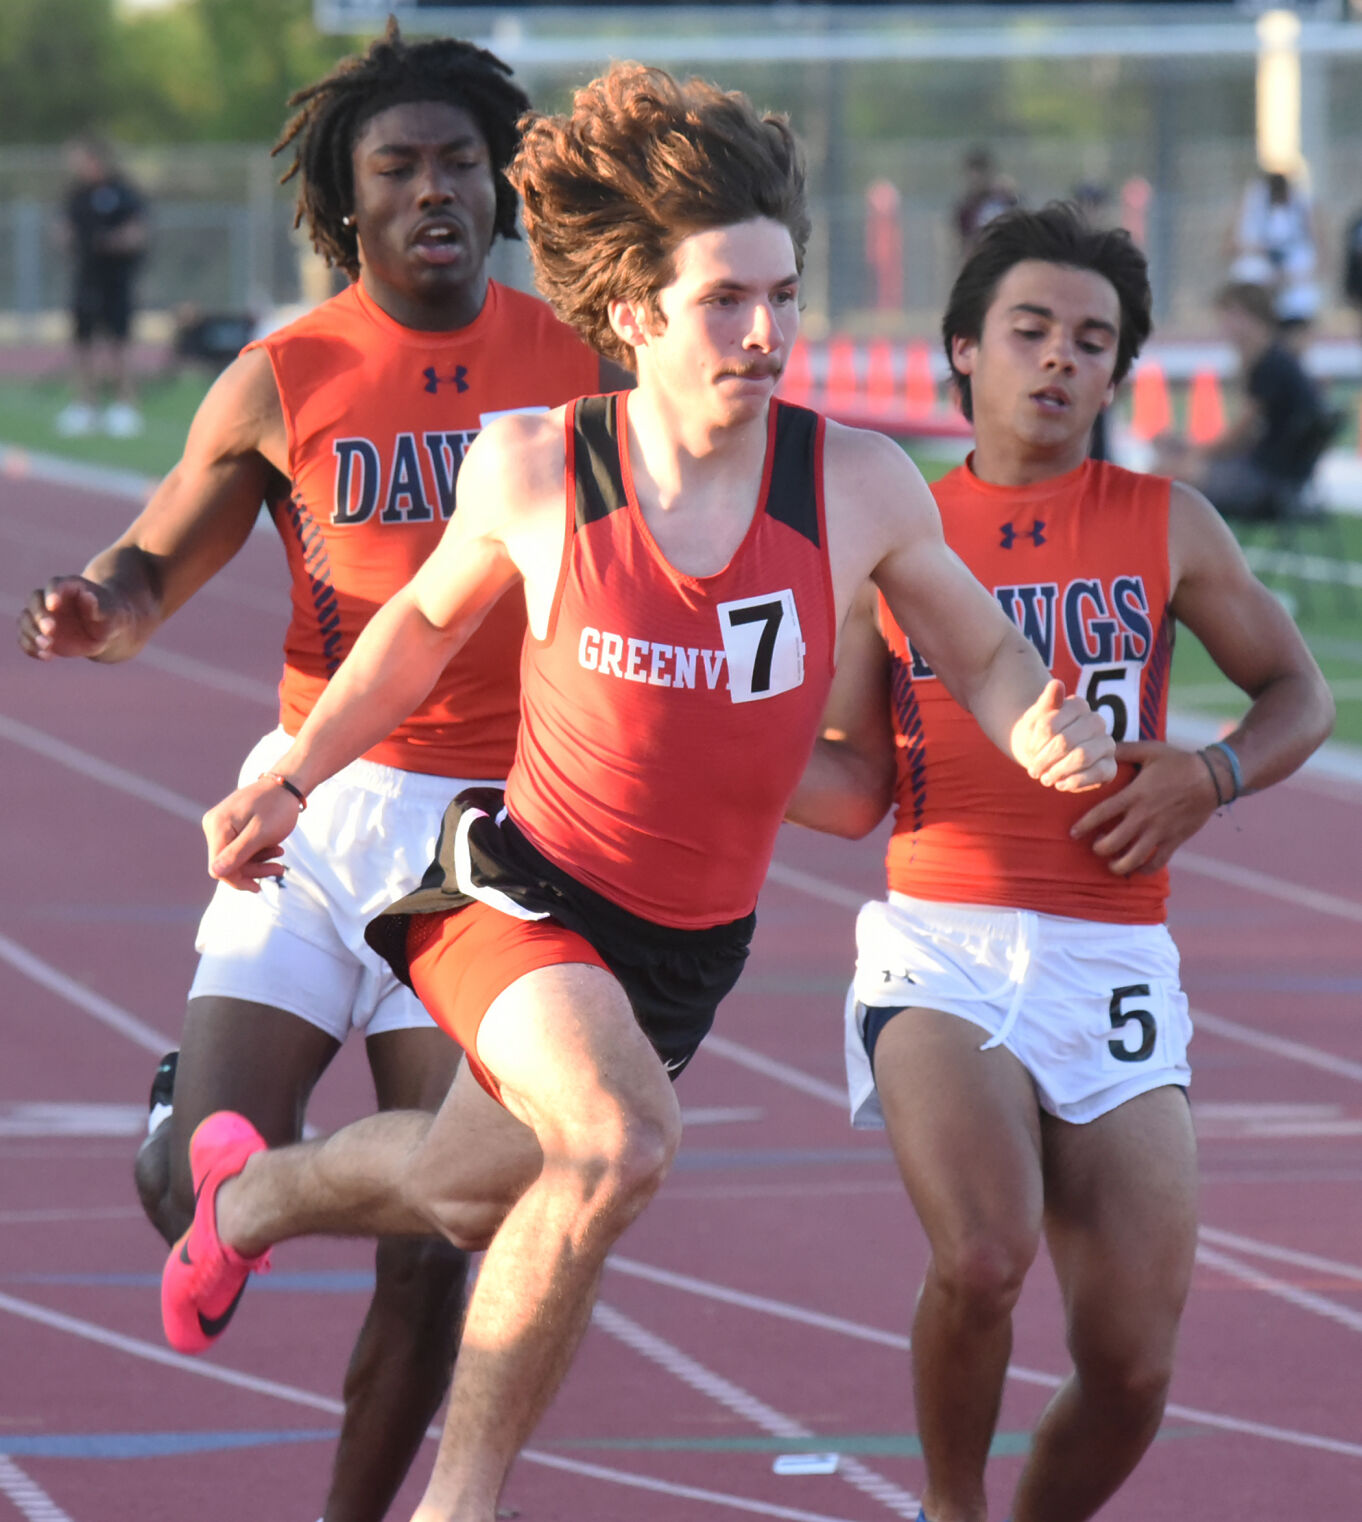 Greenville Lions shine at District 13-5A: 3 Qualify for Area Meet